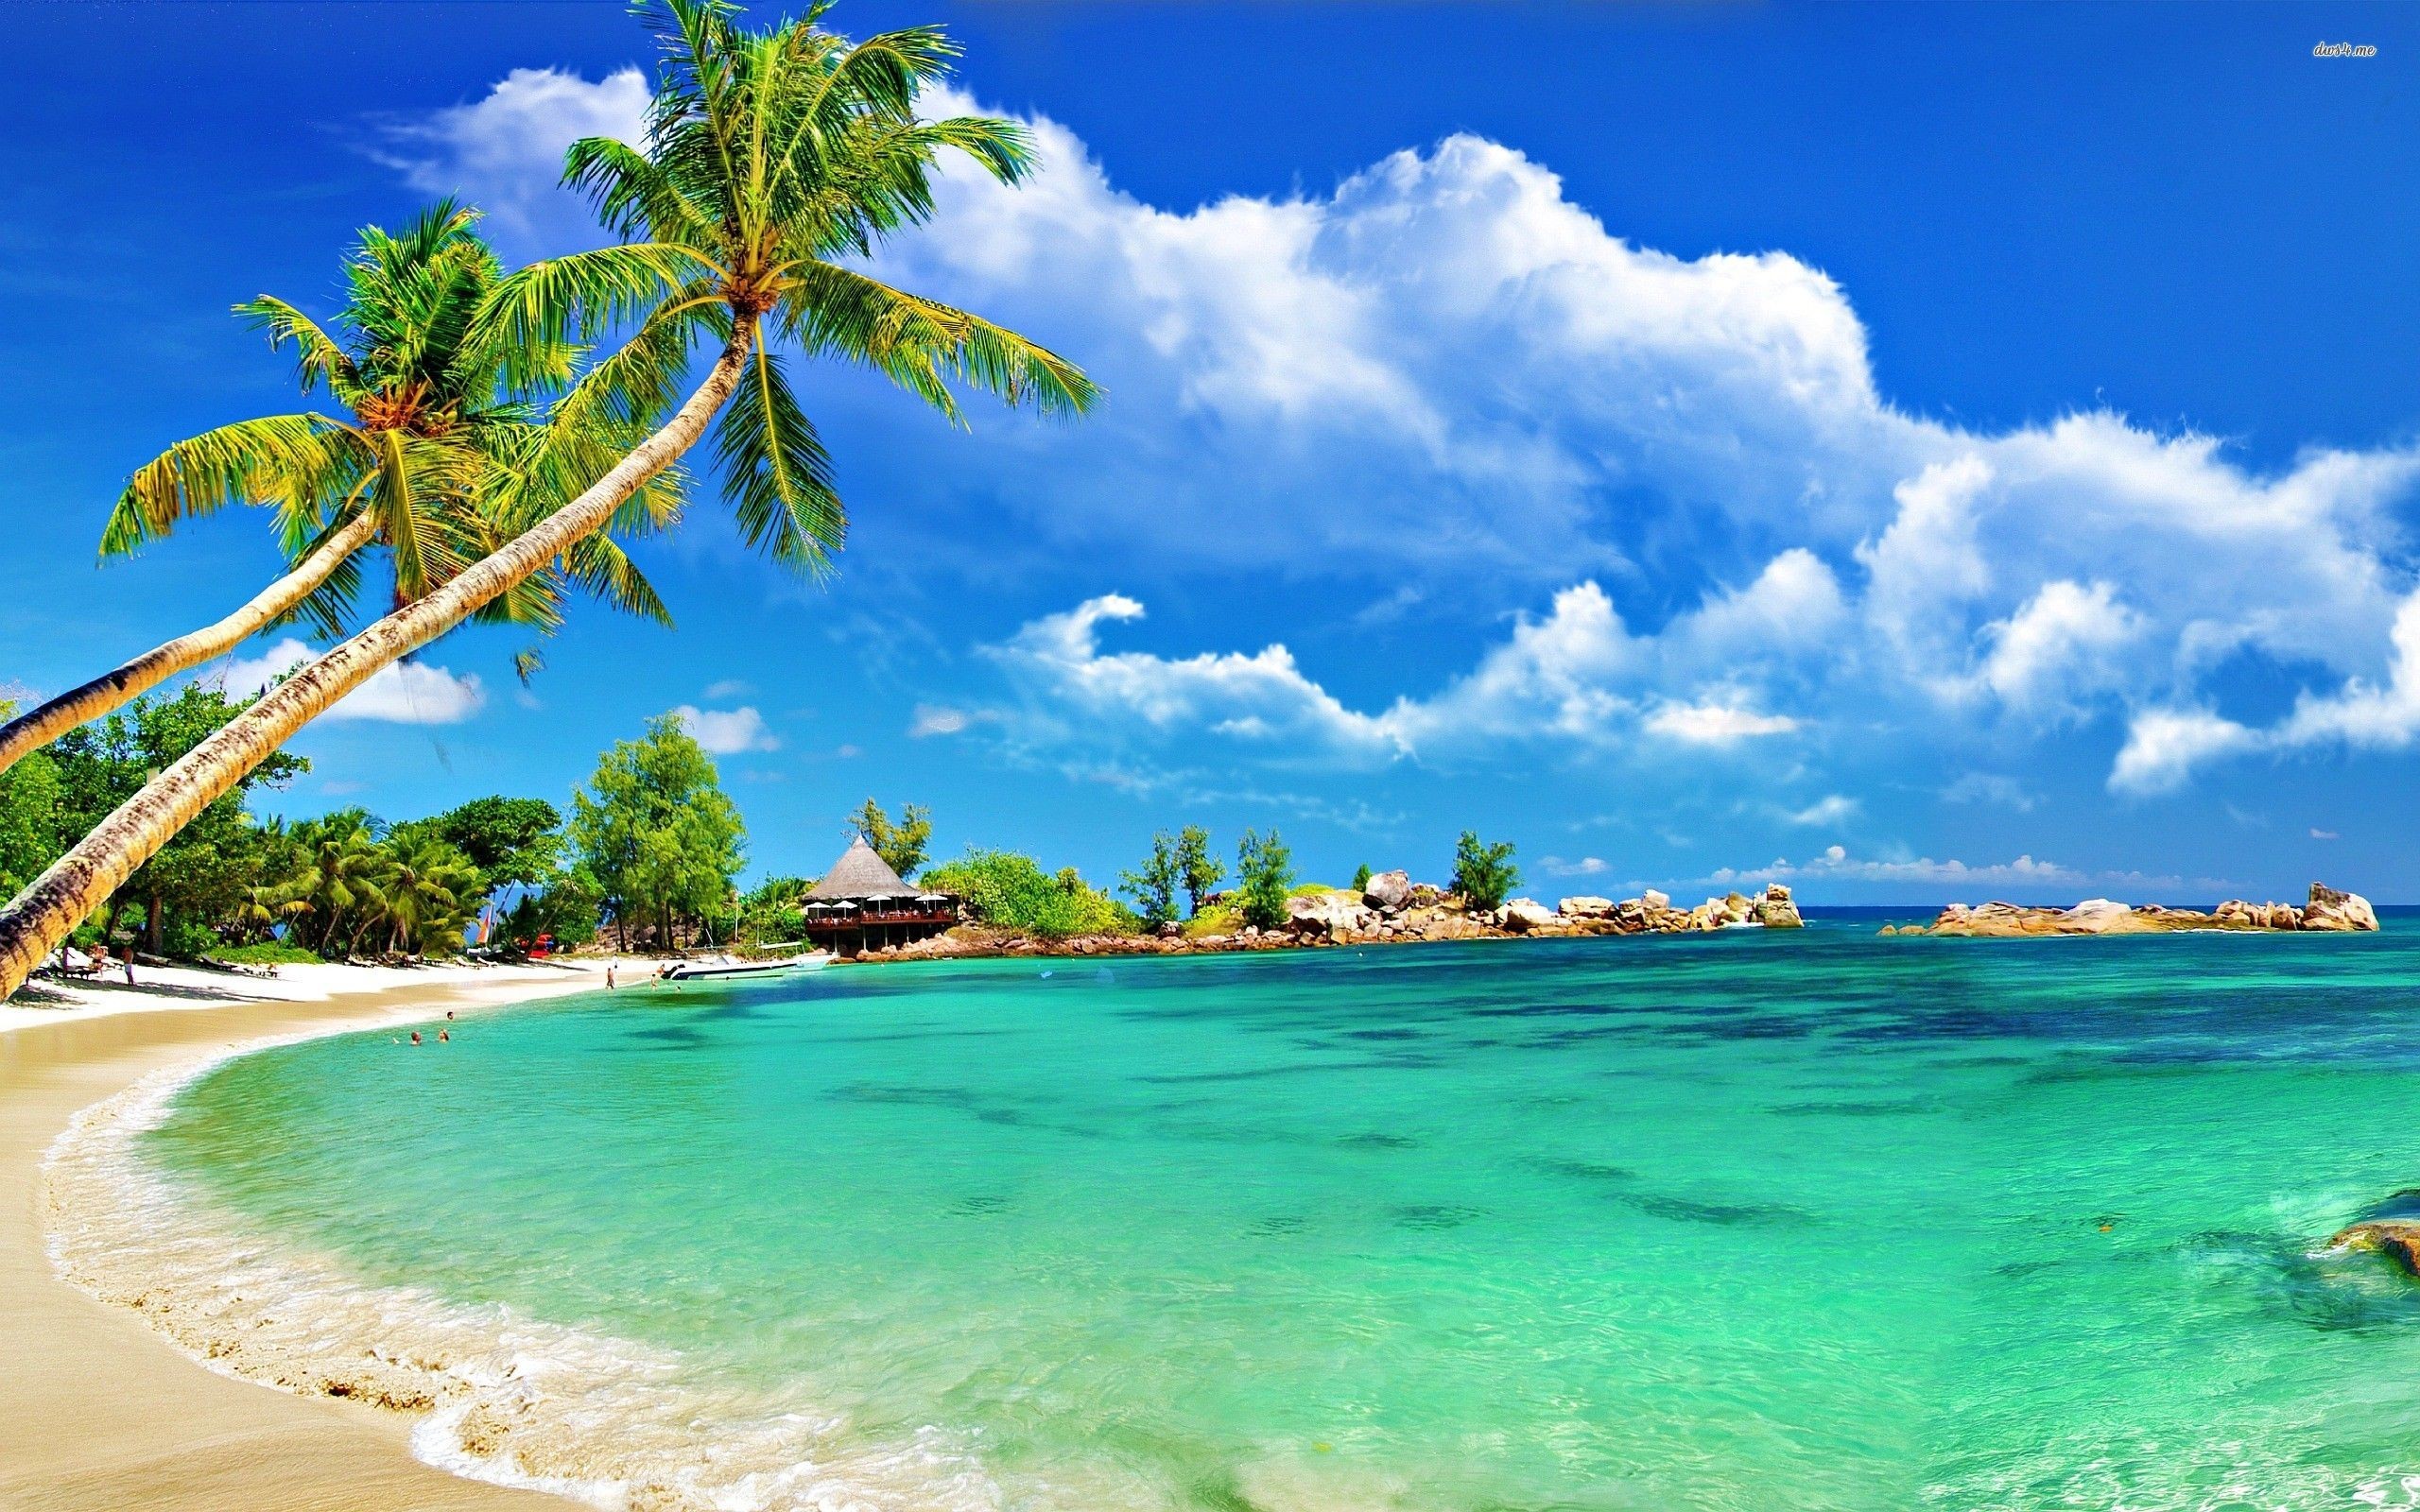 2560x1600 Tropical Beaches Hd Background Wallpaper 34 HD Wallpapers .